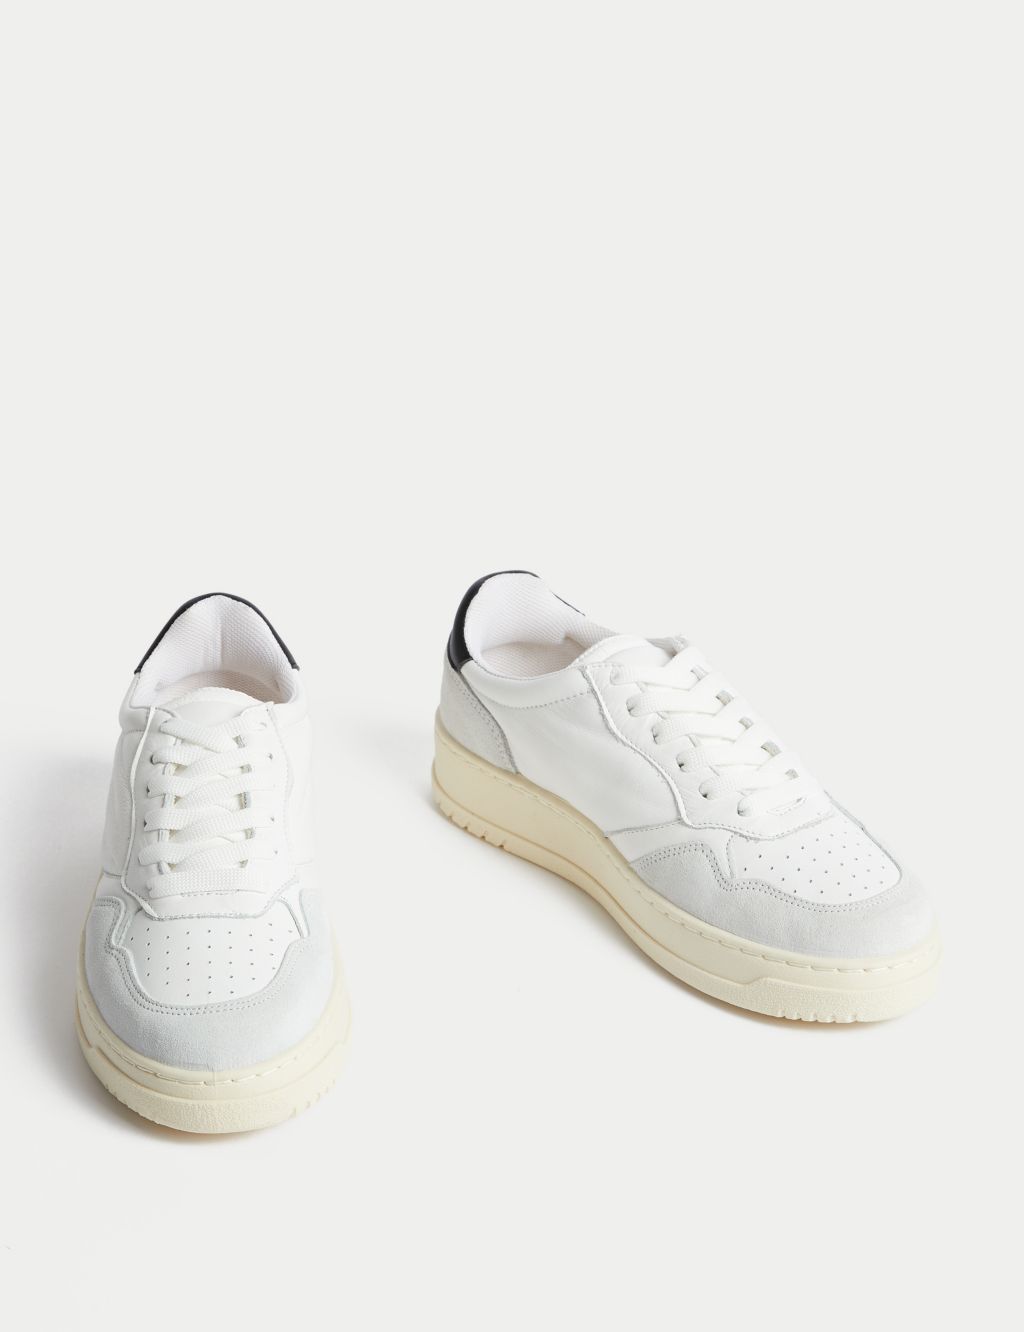 Leather Lace Up Suede Panel Trainers image 2